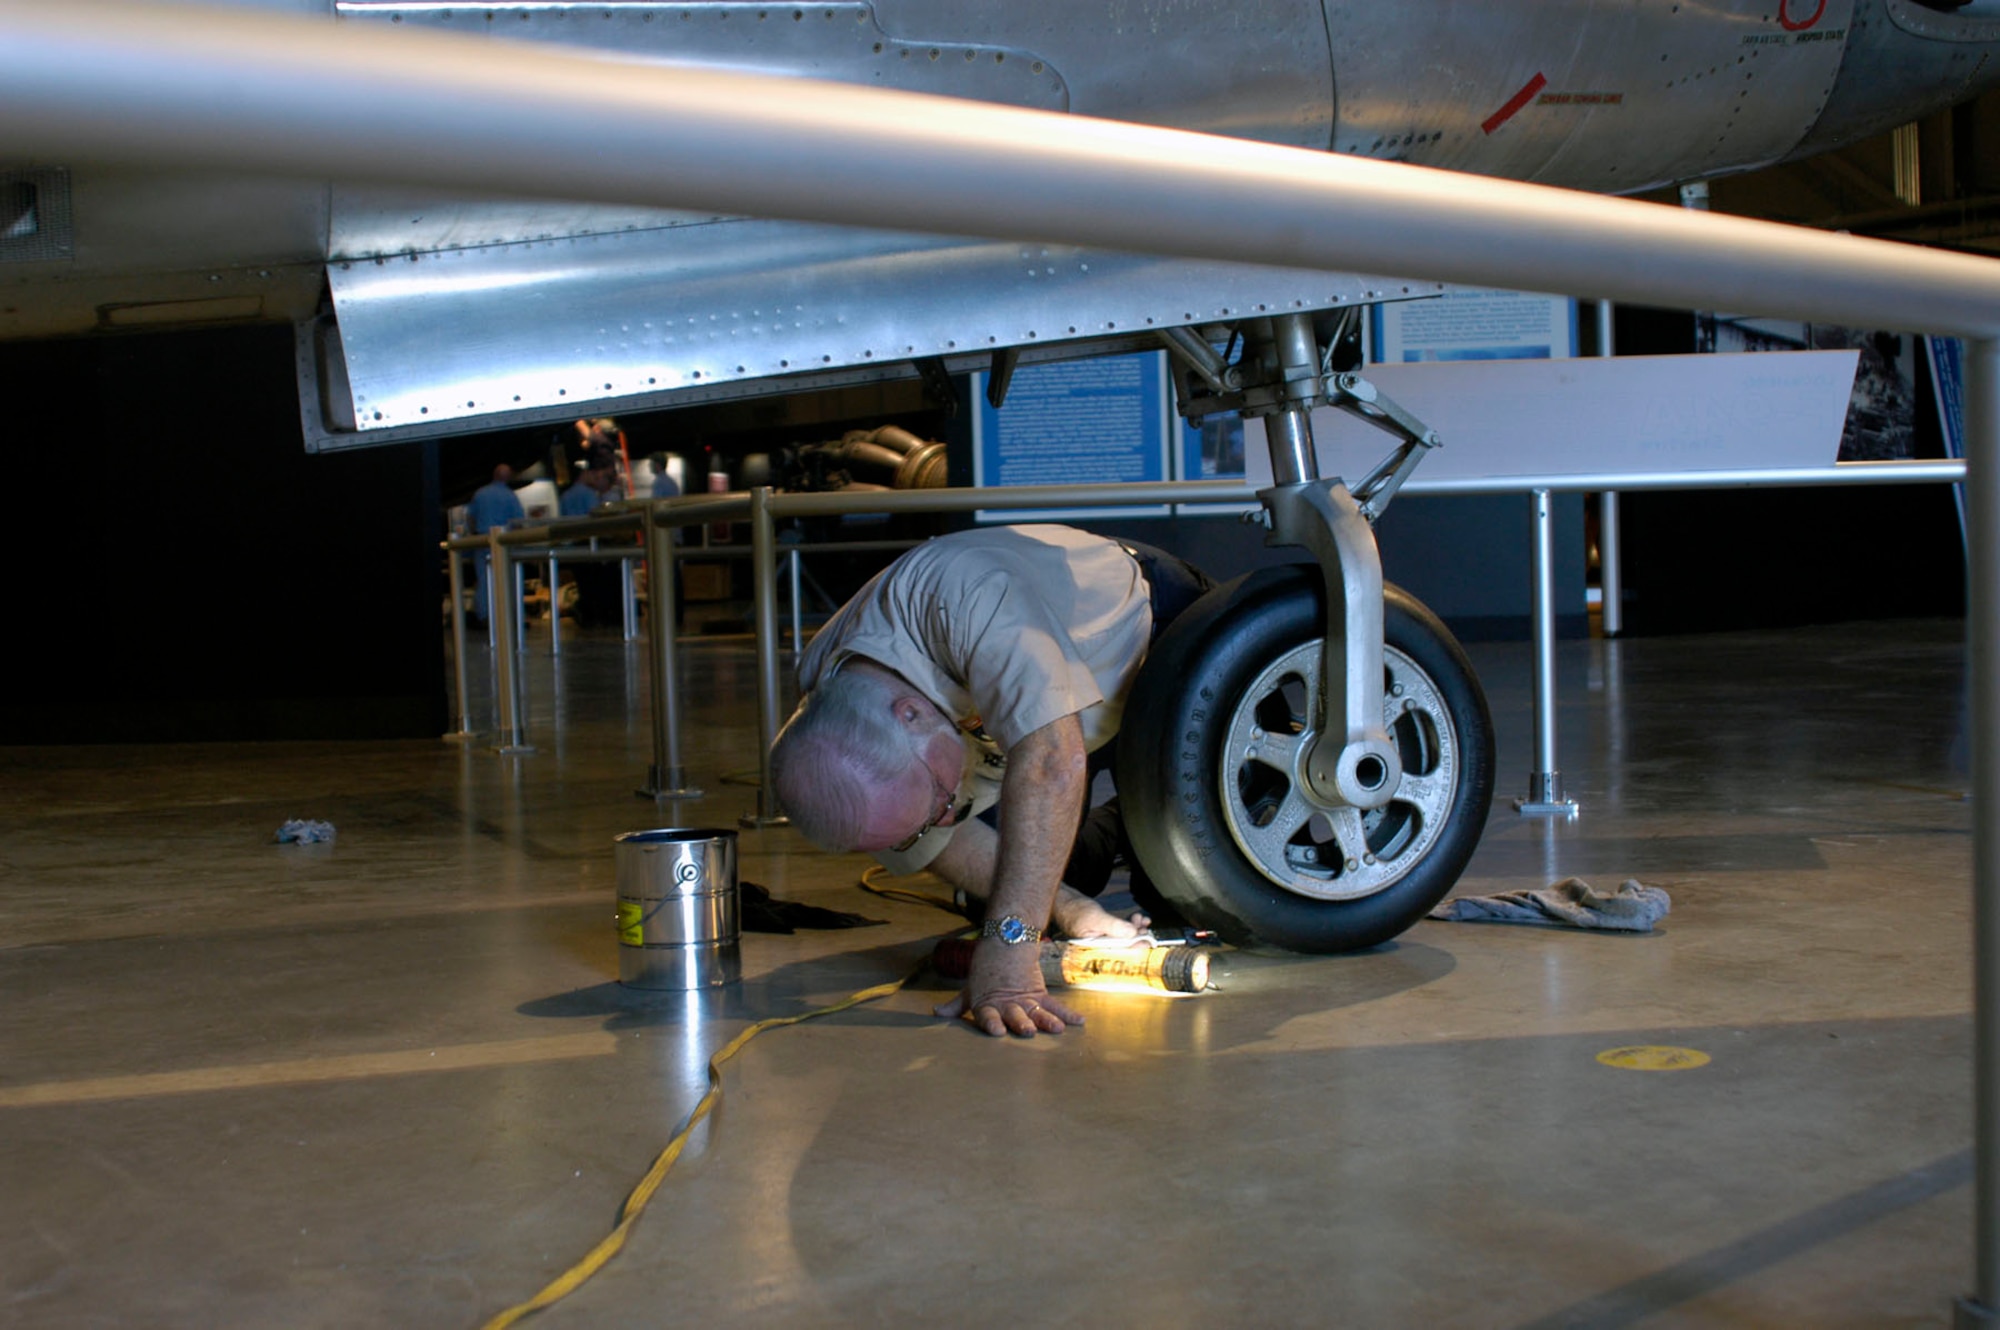 DAYTON, Ohio (05/2010) -- In preparation for the 60th anniversary of the Korean War, the National Museum of the U.S. Air Force is renovating its Korean War exhibit. Here, a restoration volunteer puts finishing touches on the F-84. (U.S. Air Force photo)